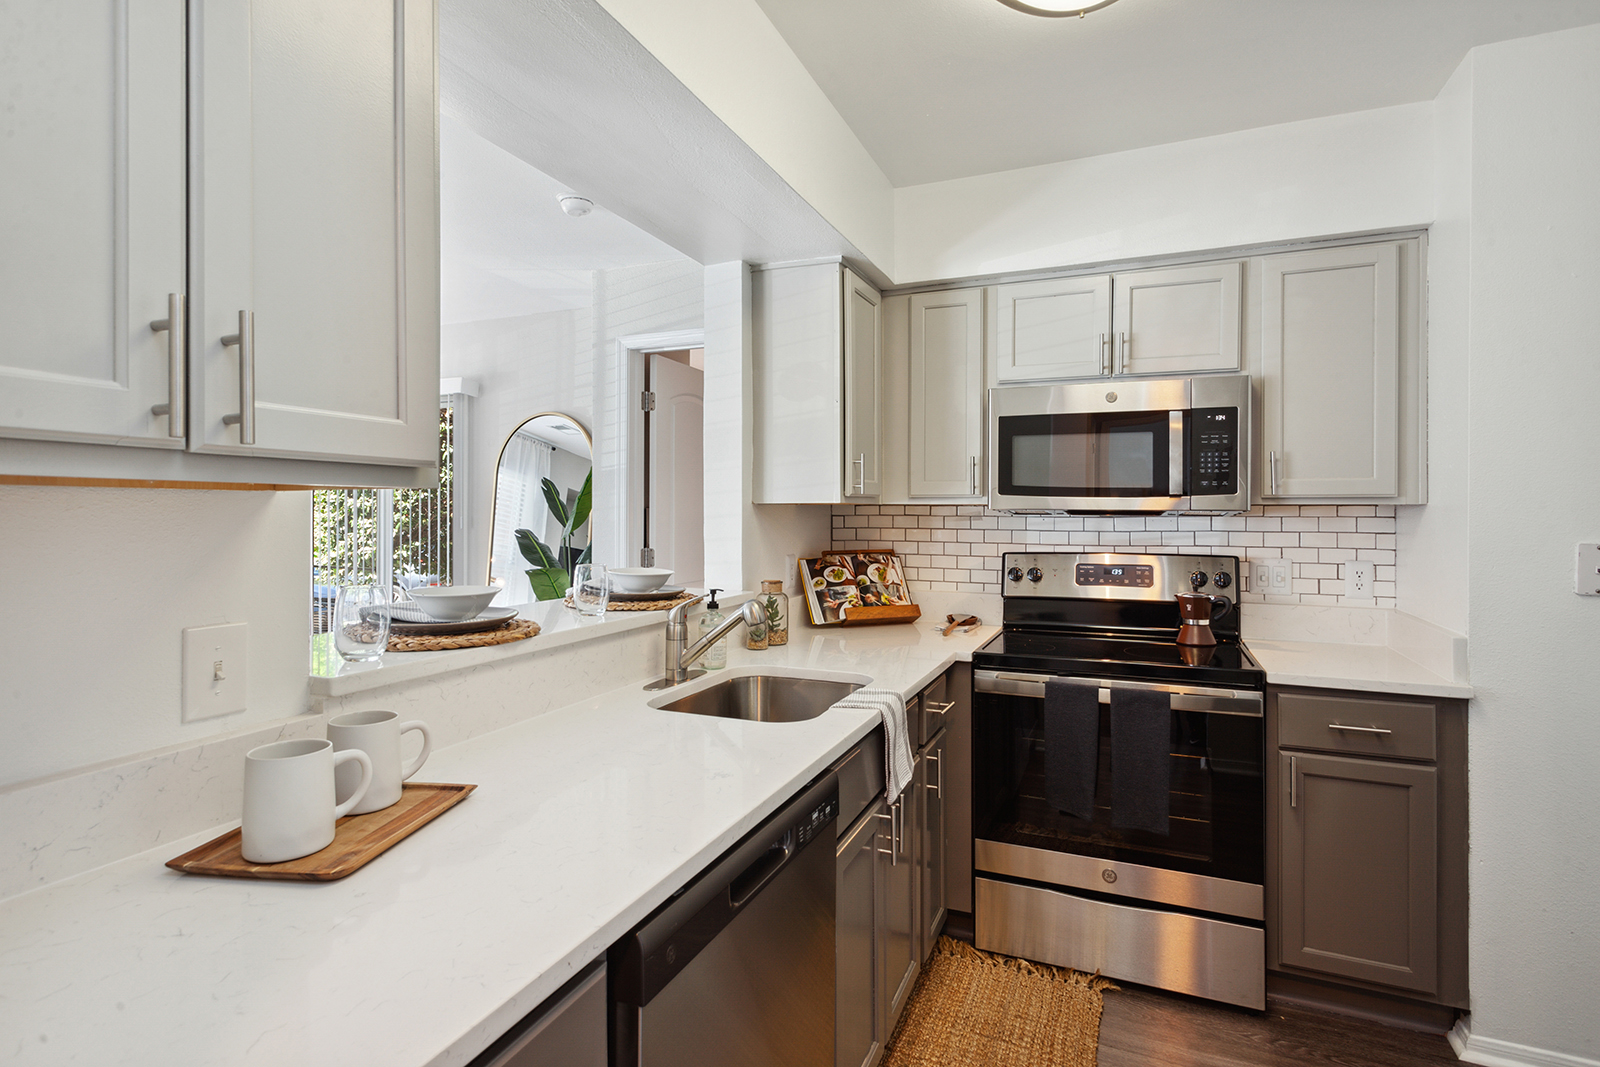 luxury crofton apartment kitchen with stainless steel appliances and grey cabinets